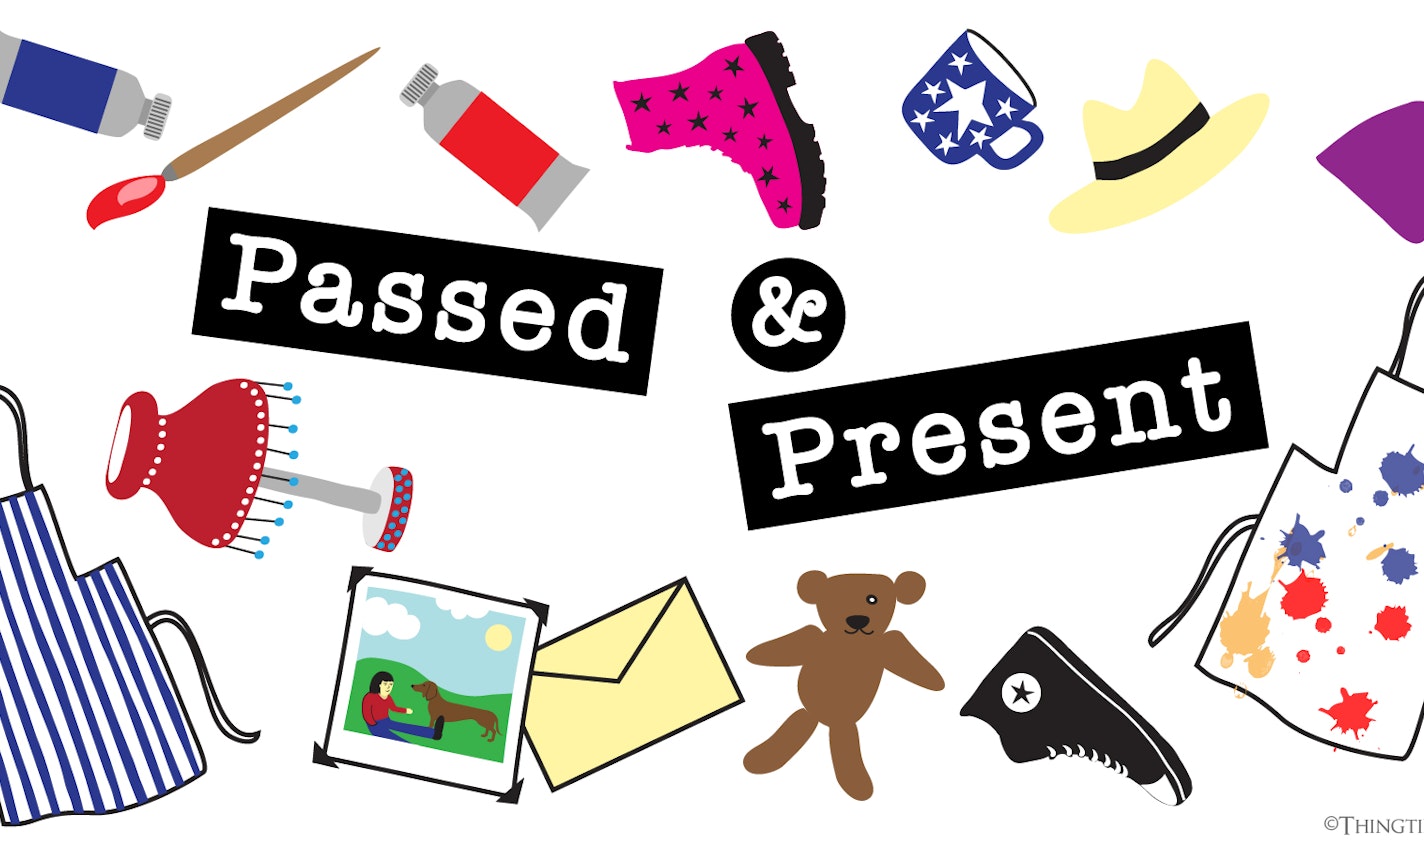 Show & Tale: Passed & Present